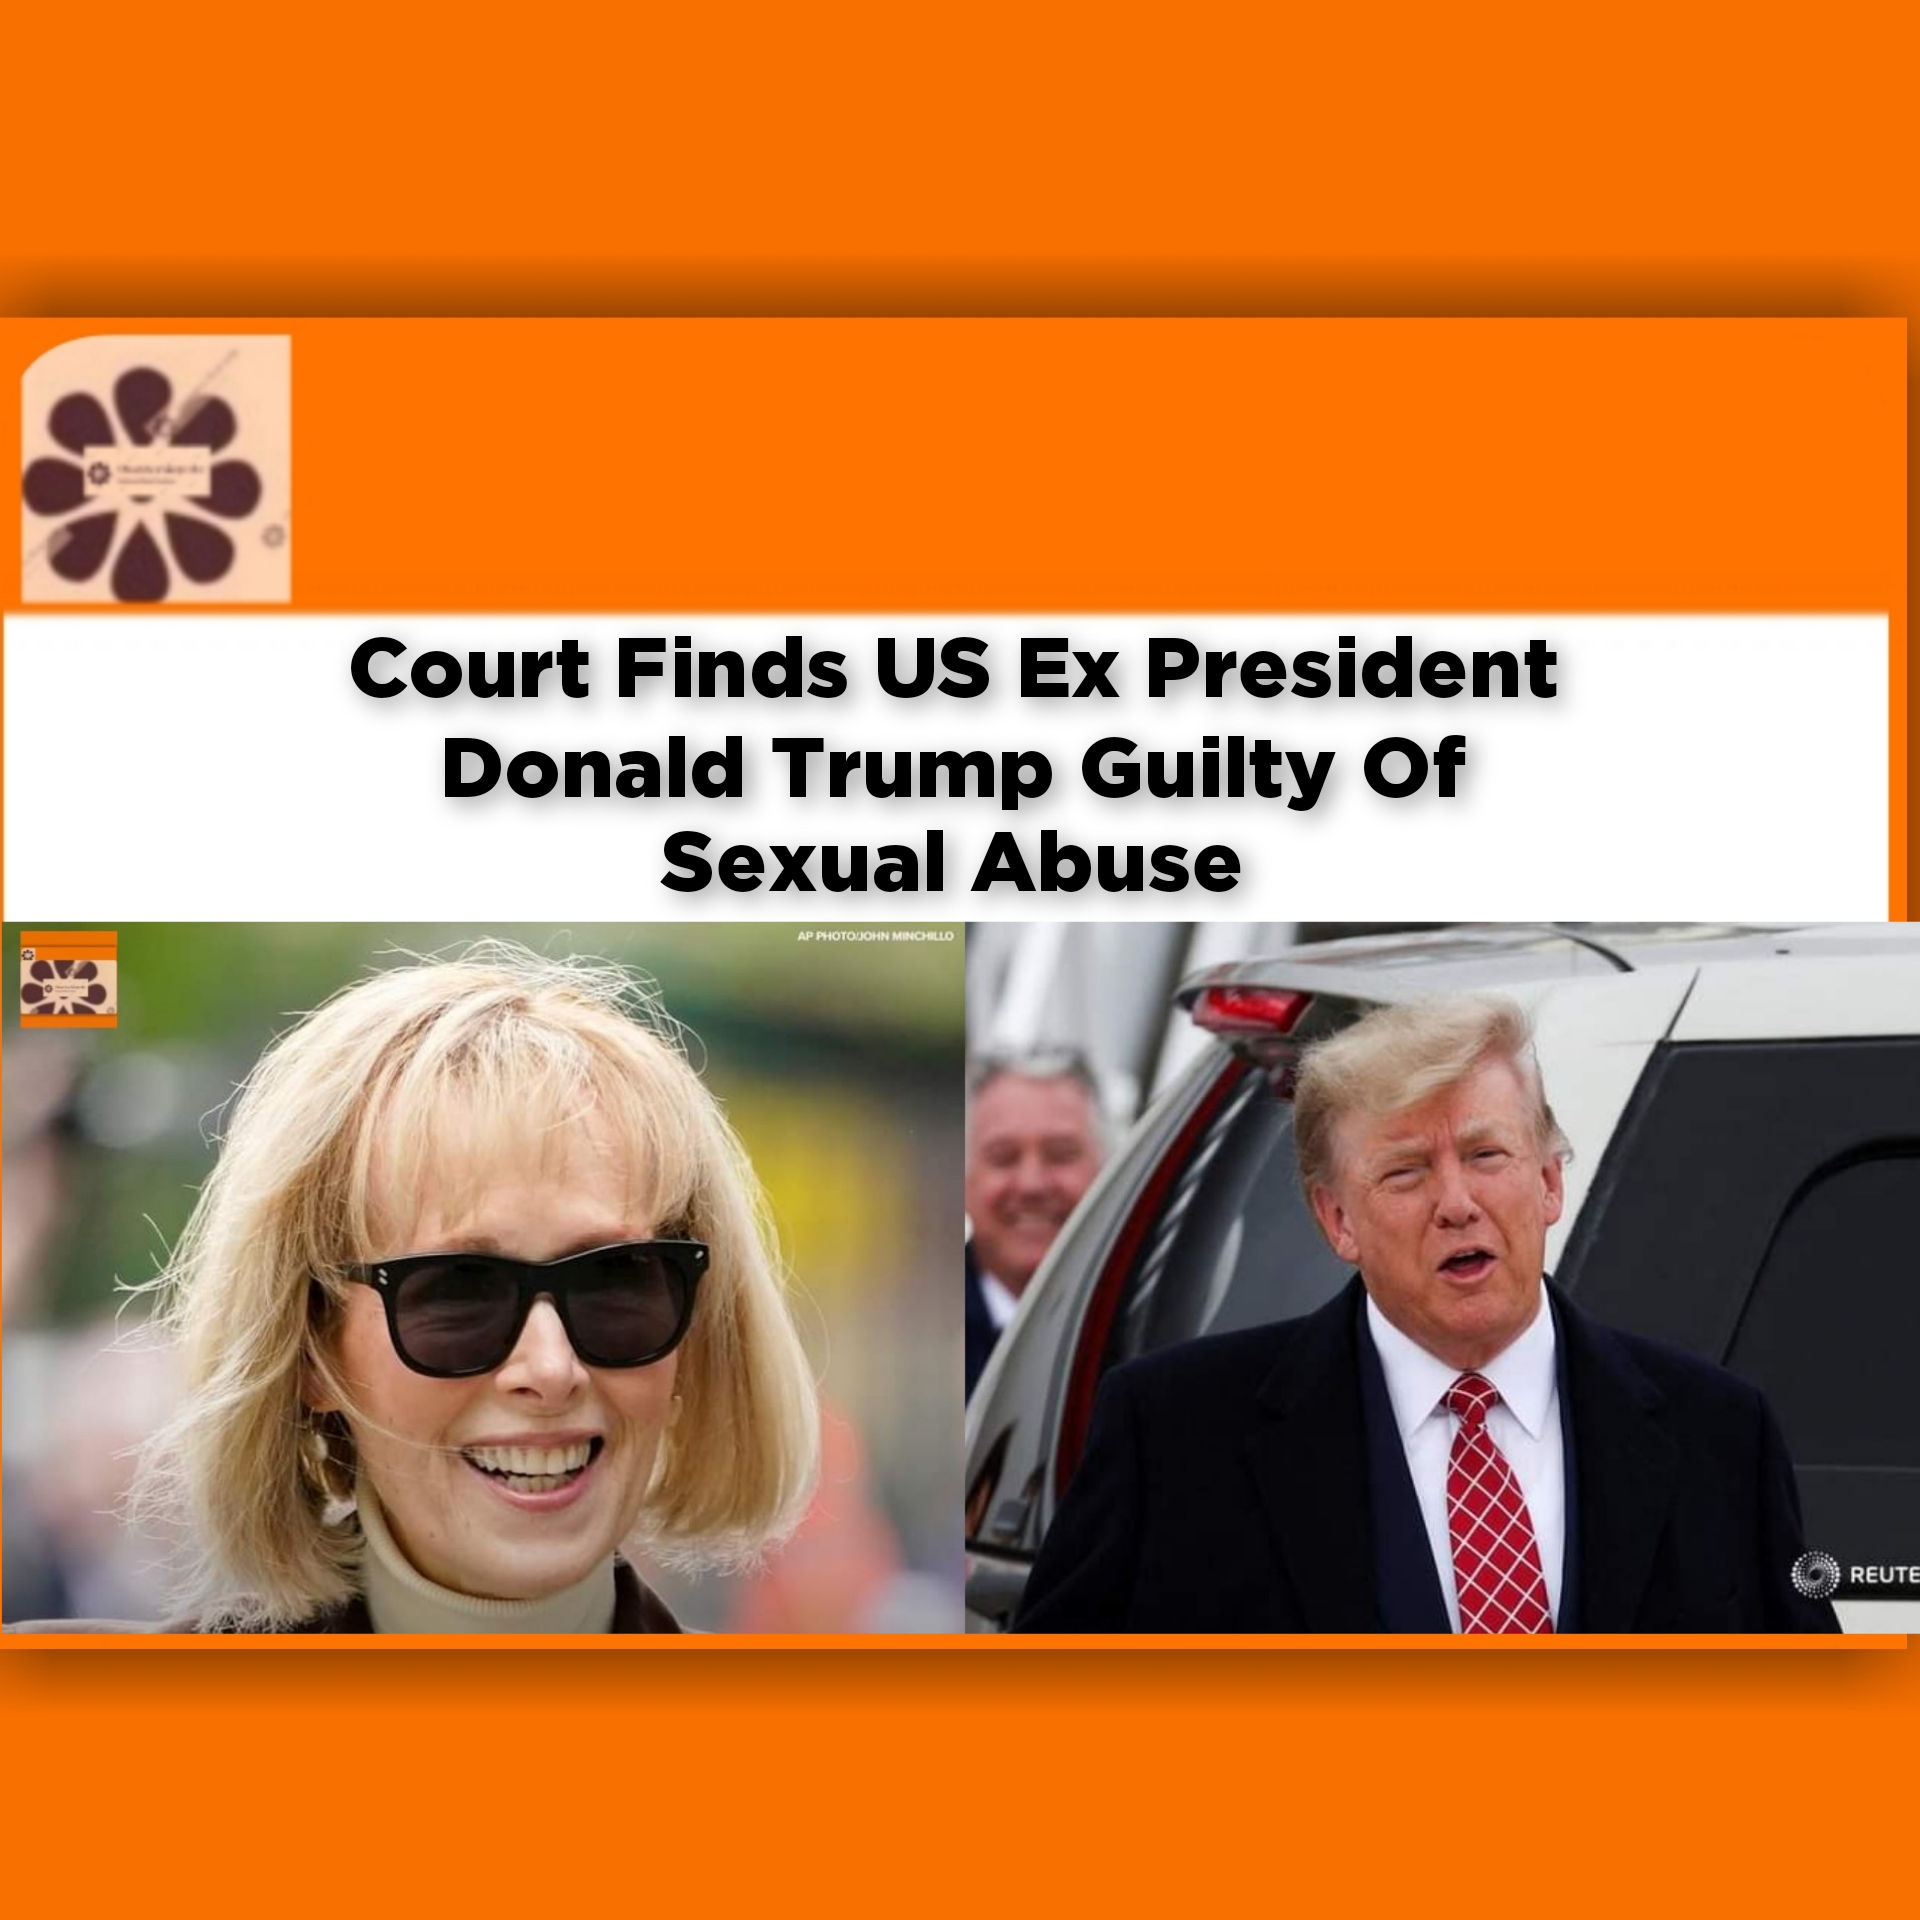 Court Finds US Ex President Donald Trump Guilty Of Sexual Abuse ~ OsazuwaAkonedo #breaking #Carroll #Donald #Jean #OsazuwaAkonedo #President #Trump